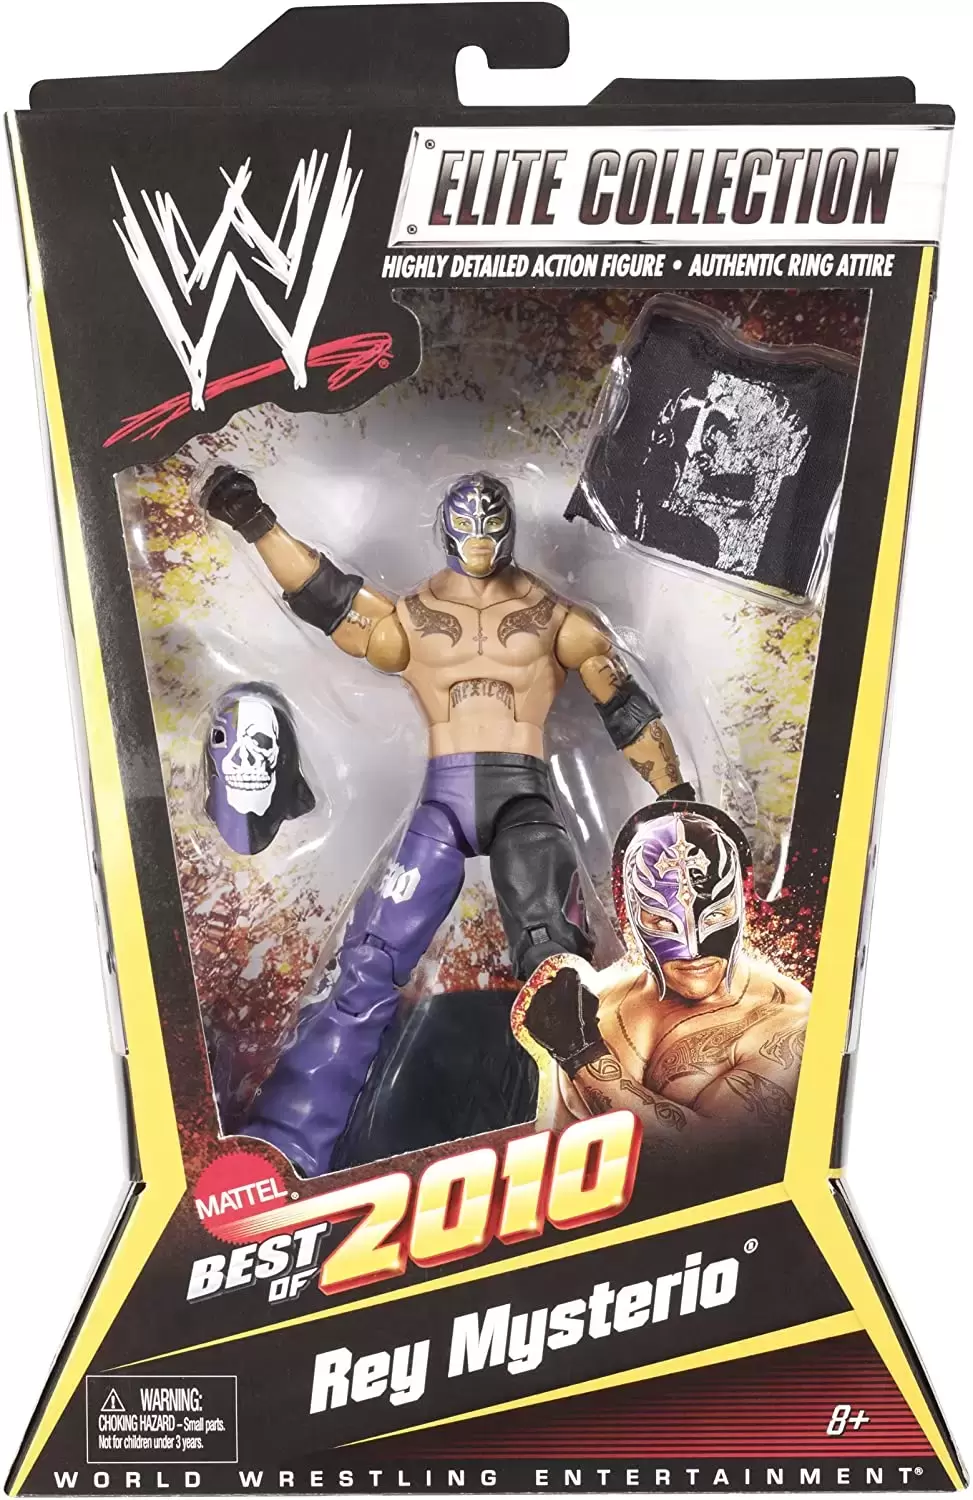 WWE Elite Collection - Rey Mysterio (Best of 2010 Series)